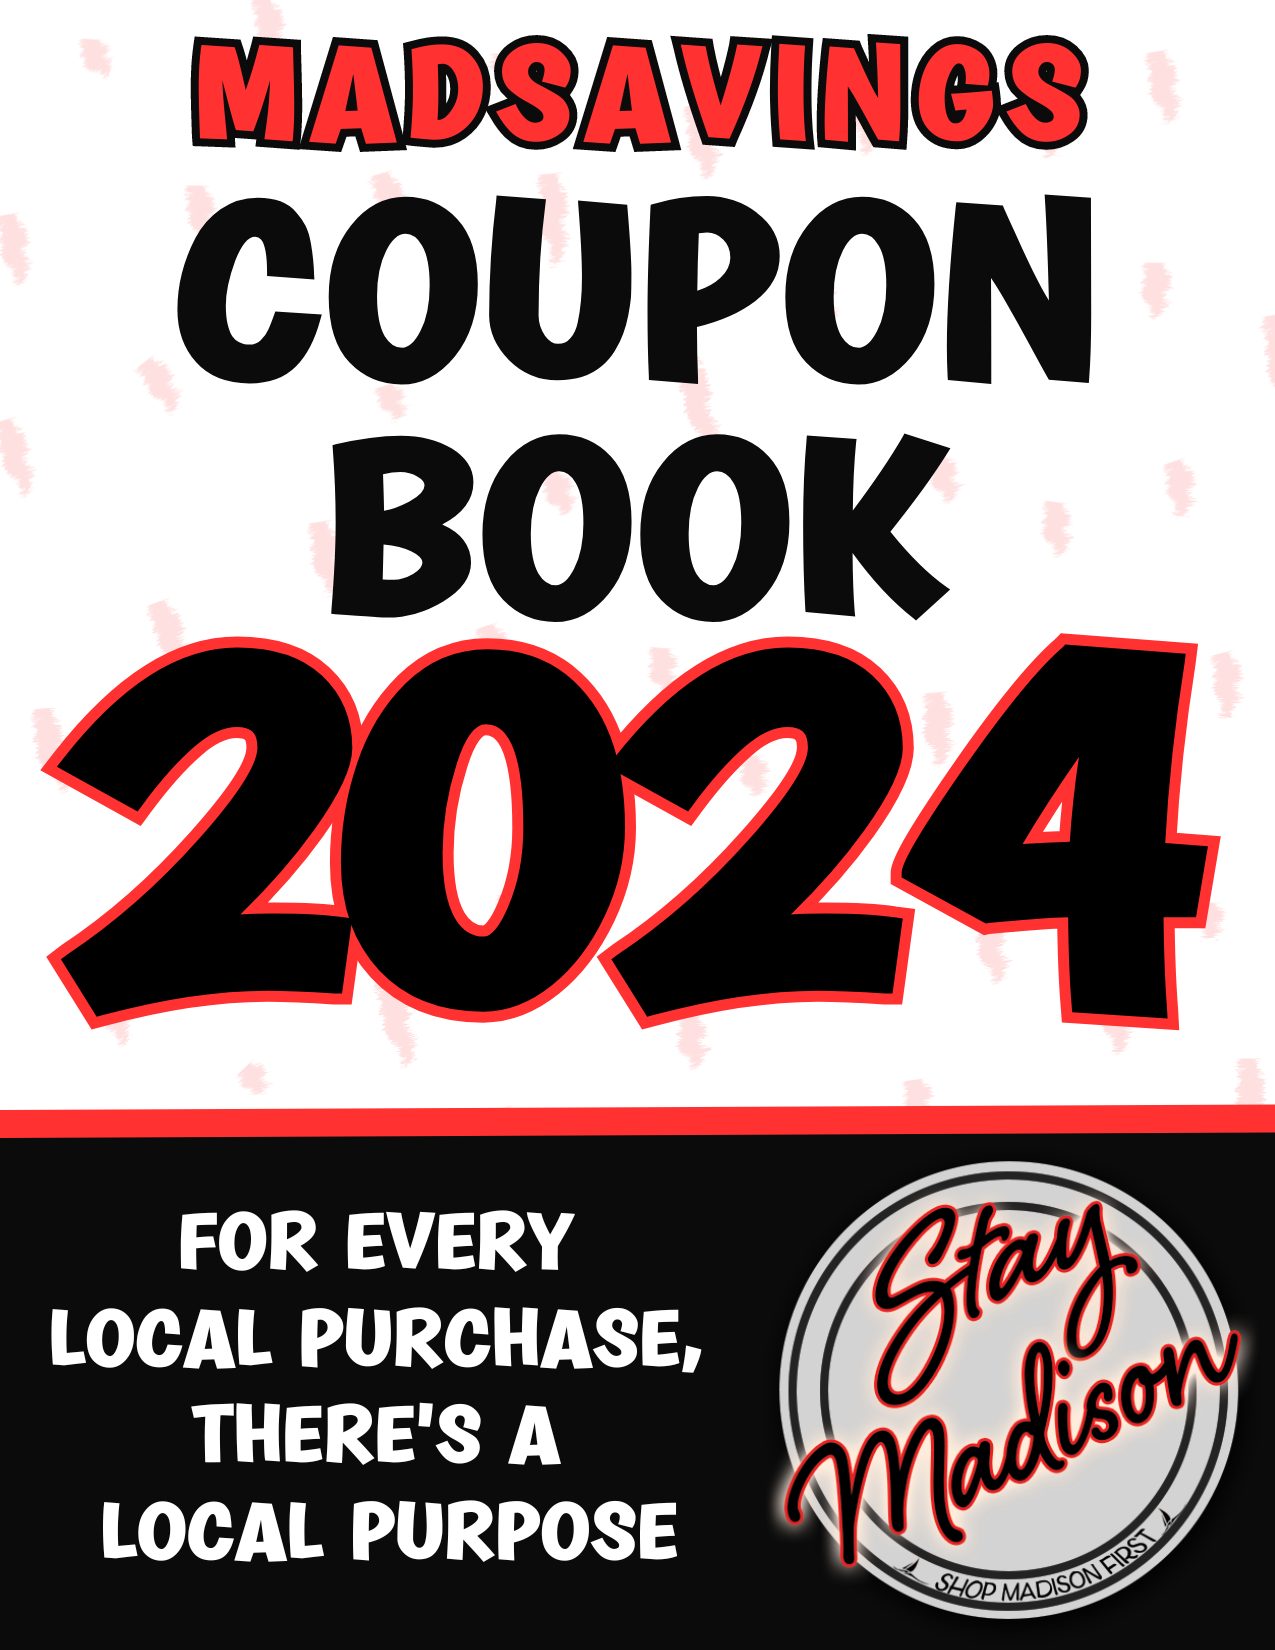 Coupon Book Covers (3)